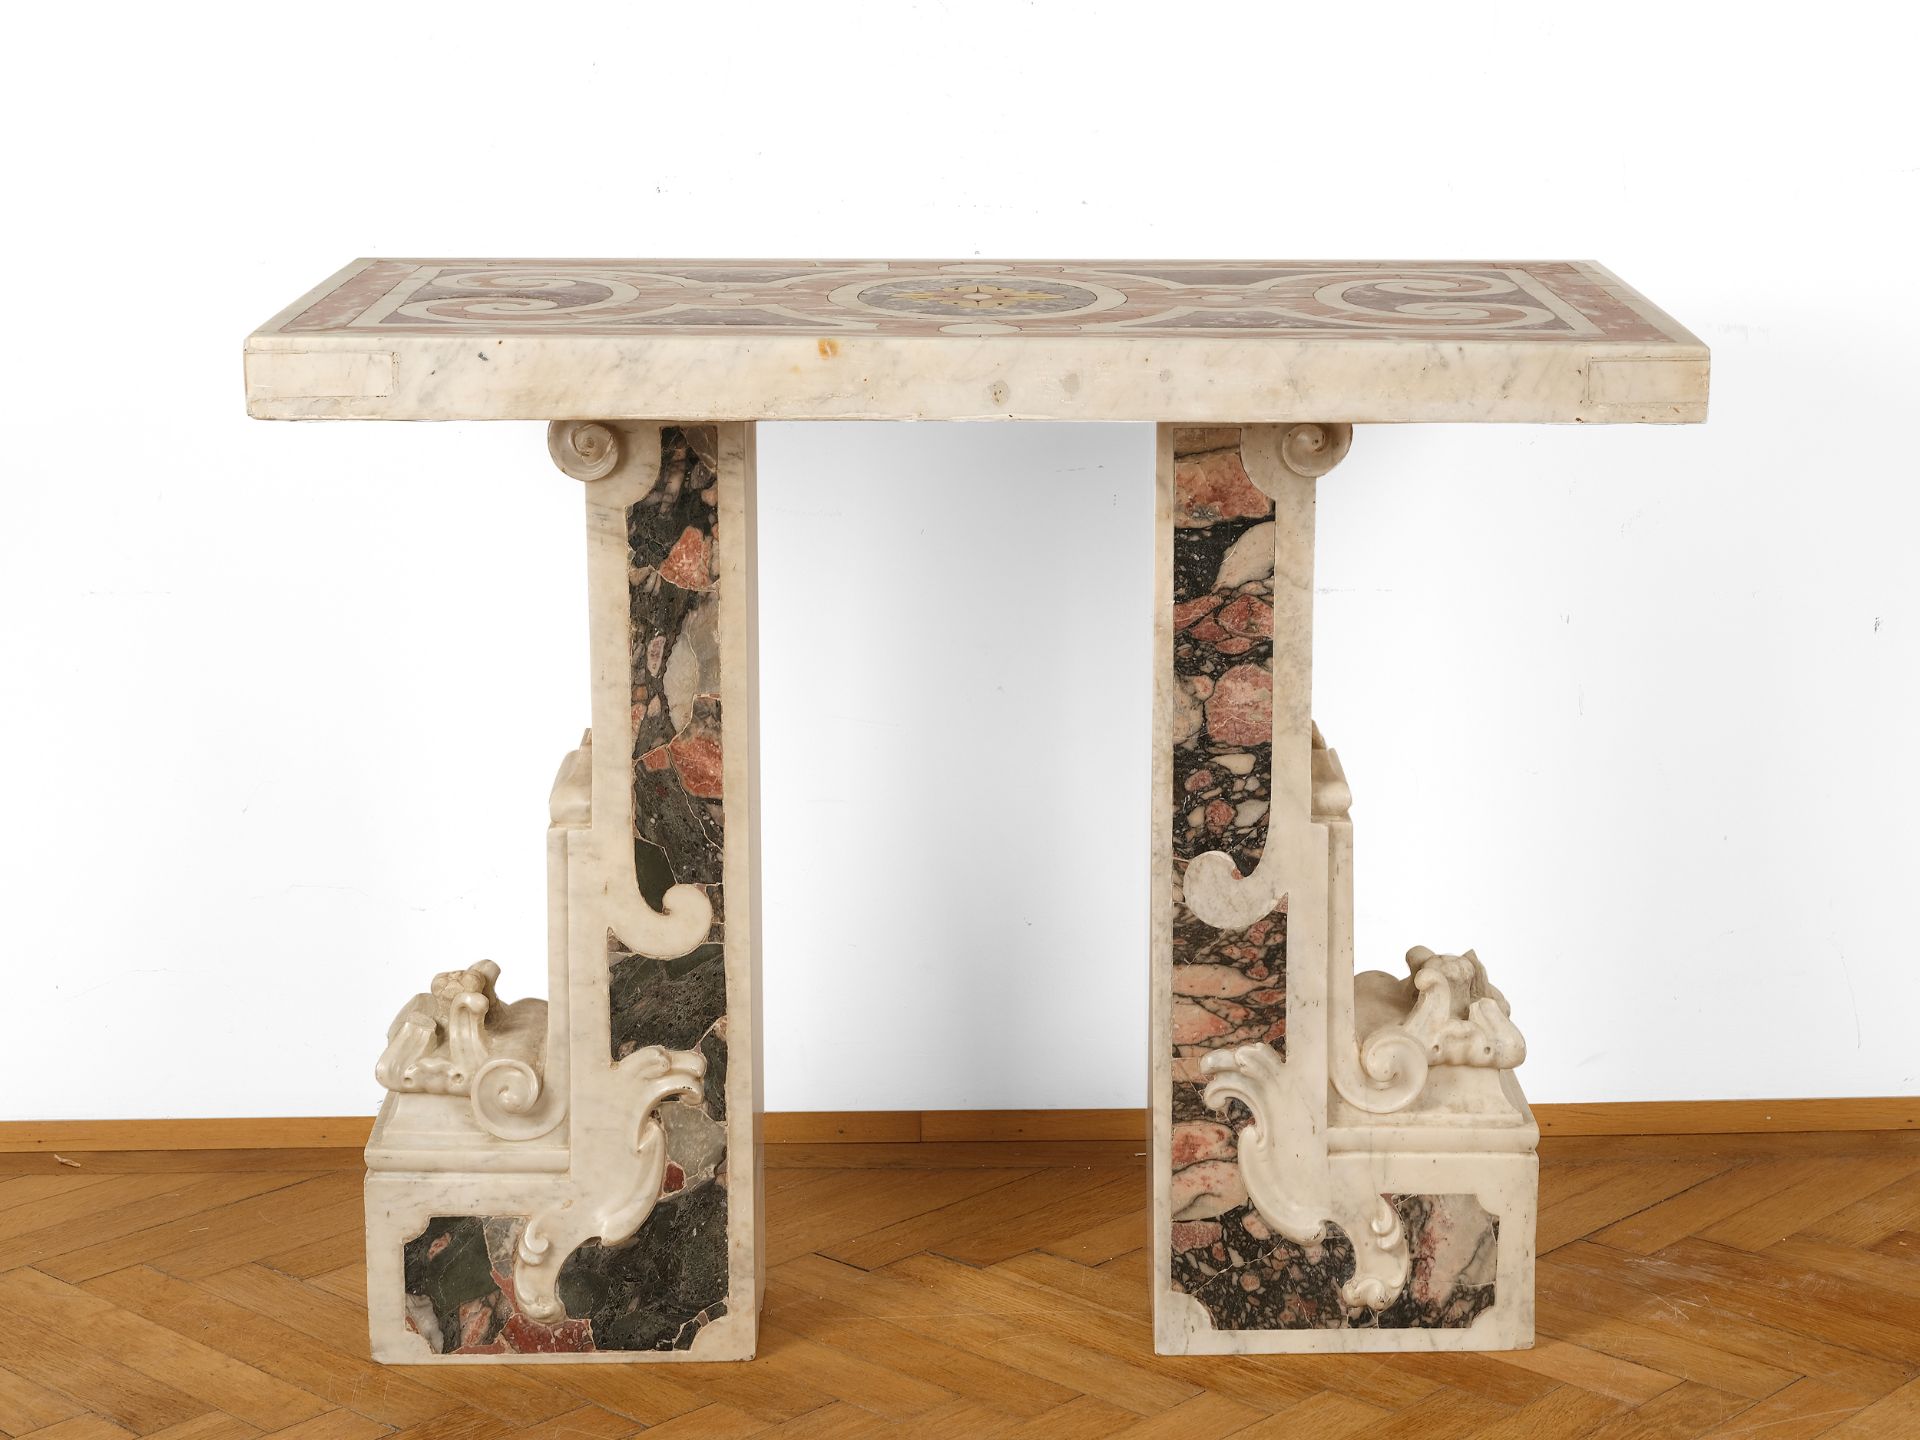 Three-piece console table, Italy/Rome (?), From elements of the 16th/17th century